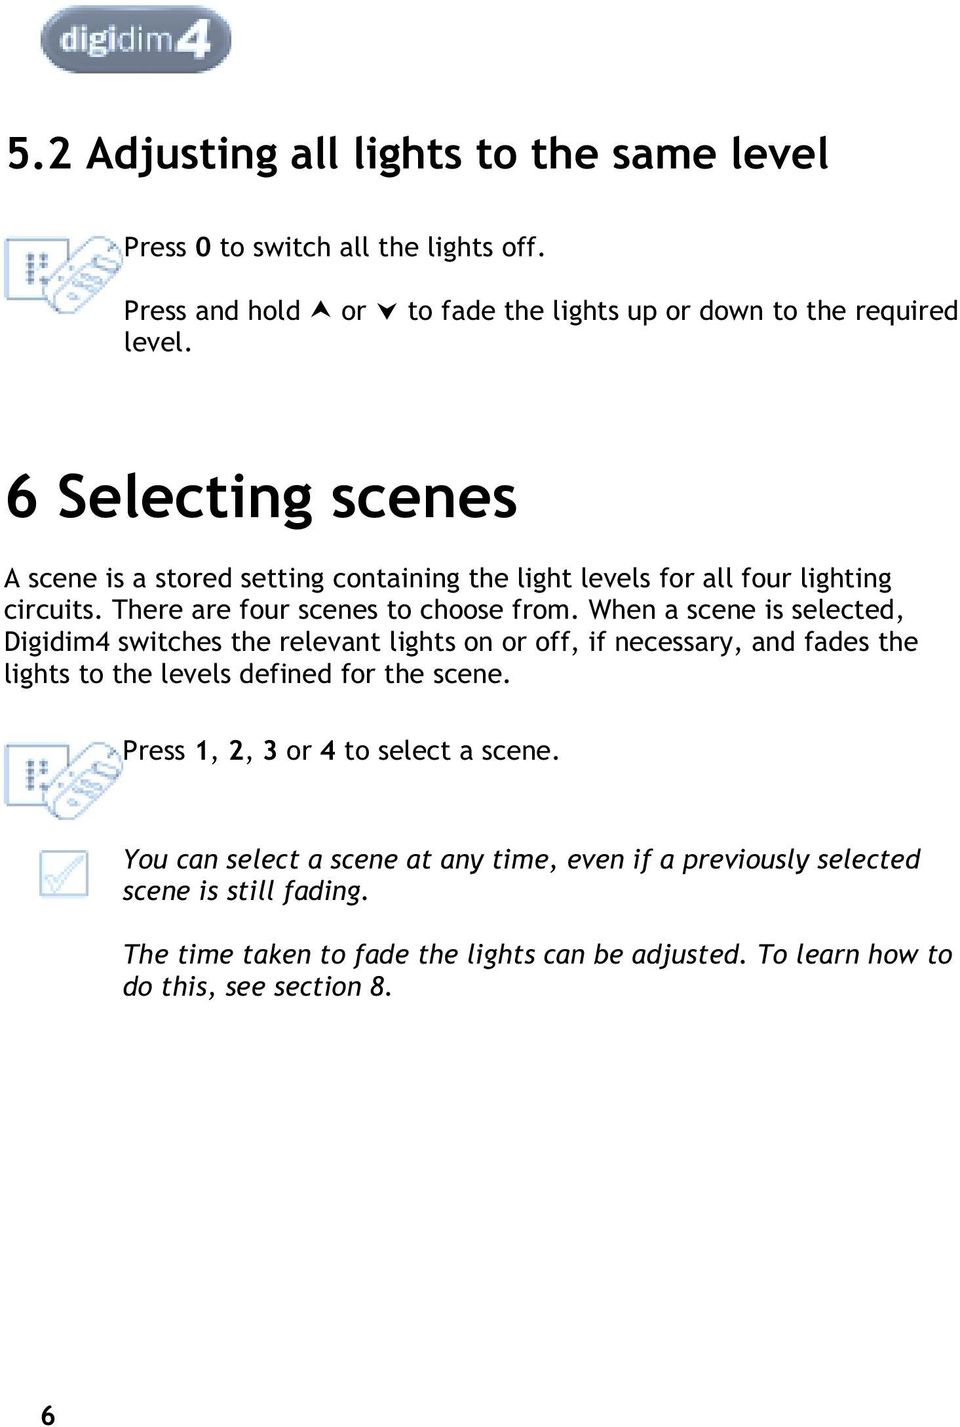 When a scene is selected, Digidim4 switches the relevant lights on or off, if necessary, and fades the lights to the levels defined for the scene.